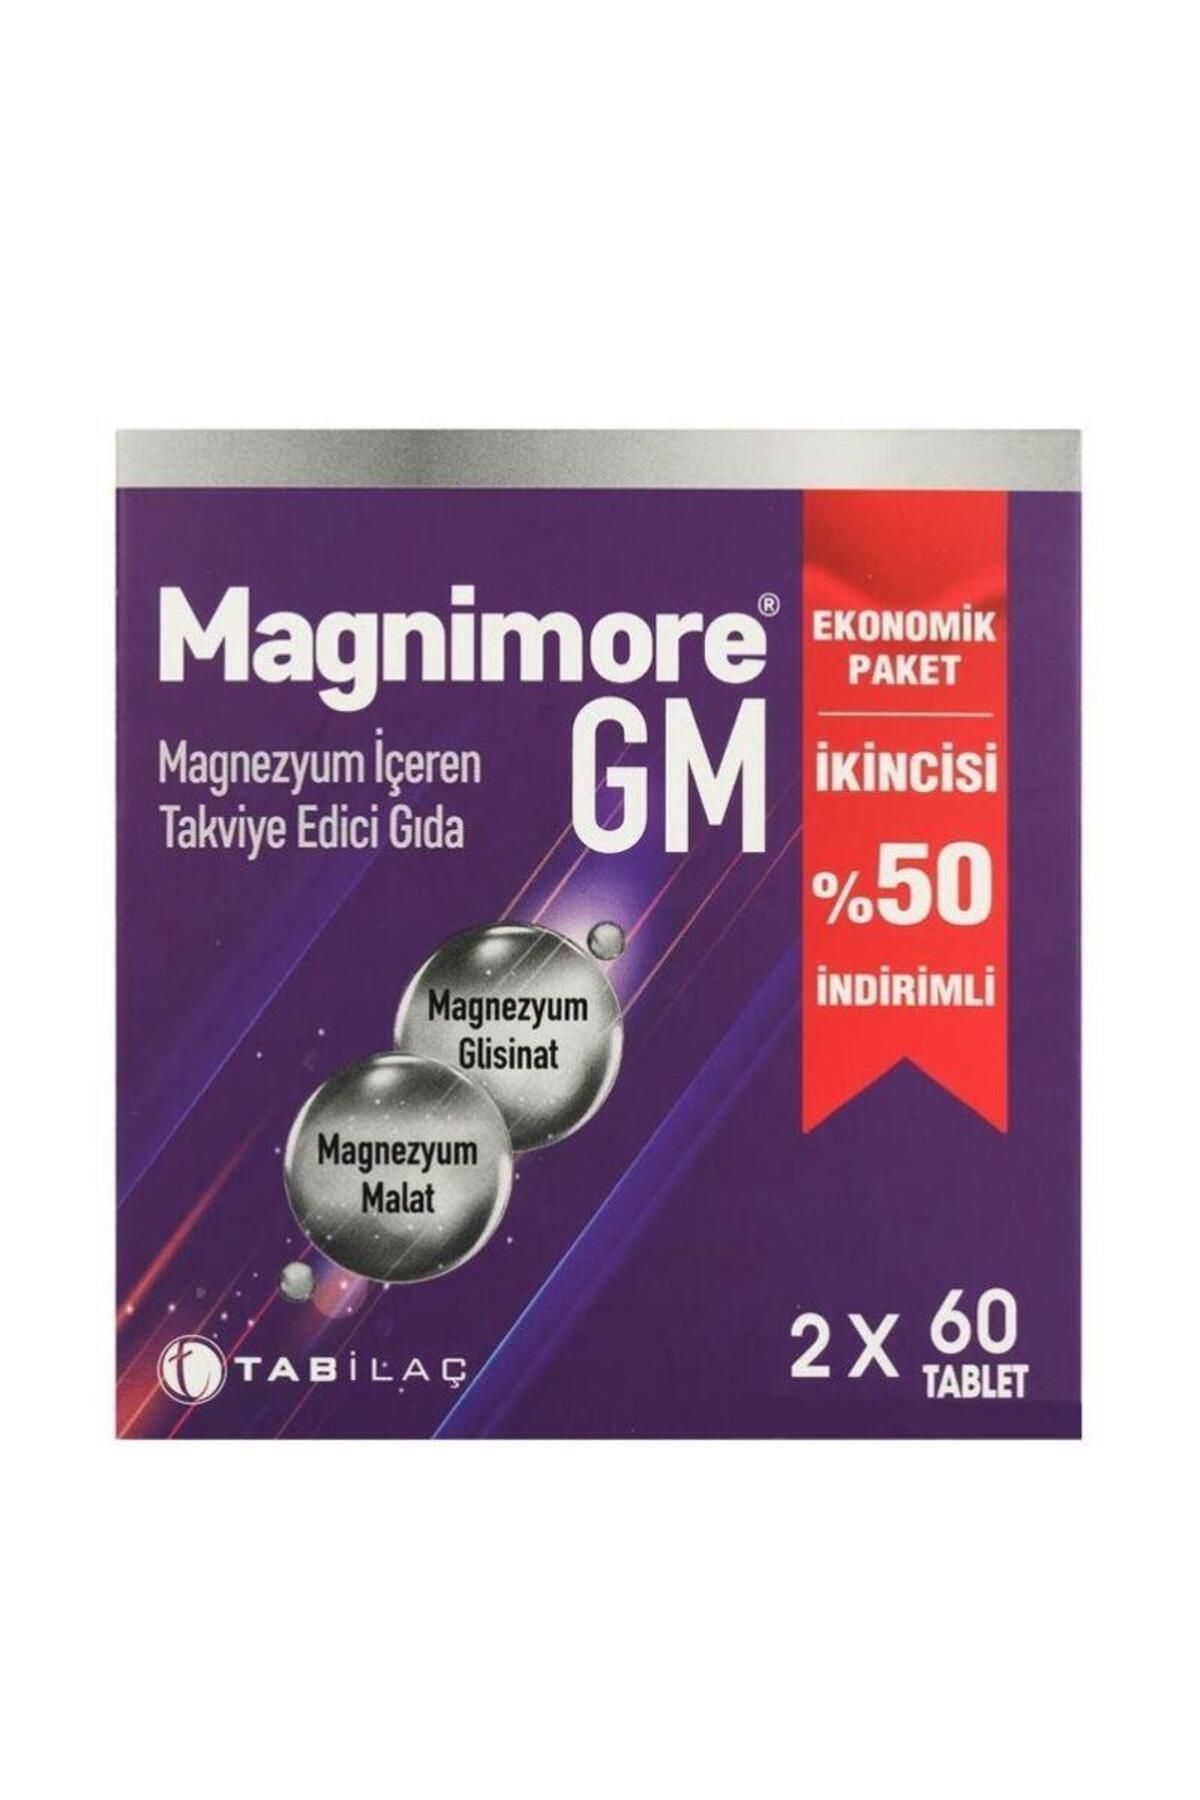 Magnimore GM Magnezyum 2x60 Tablet- 2.si %50